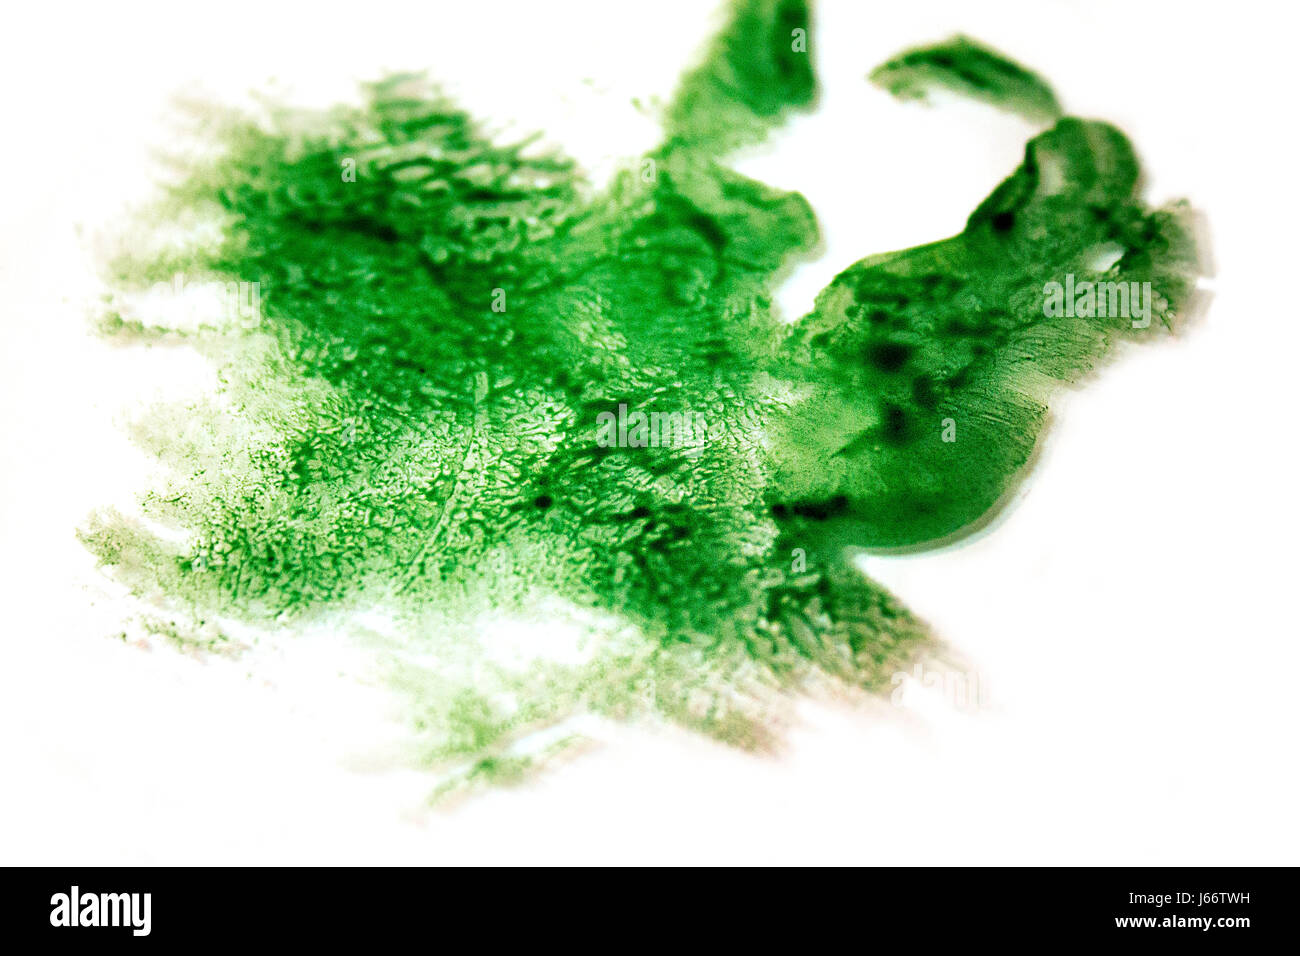 An abstract print of a human ear onto glass using natural green watercolour paints. Stock Photo